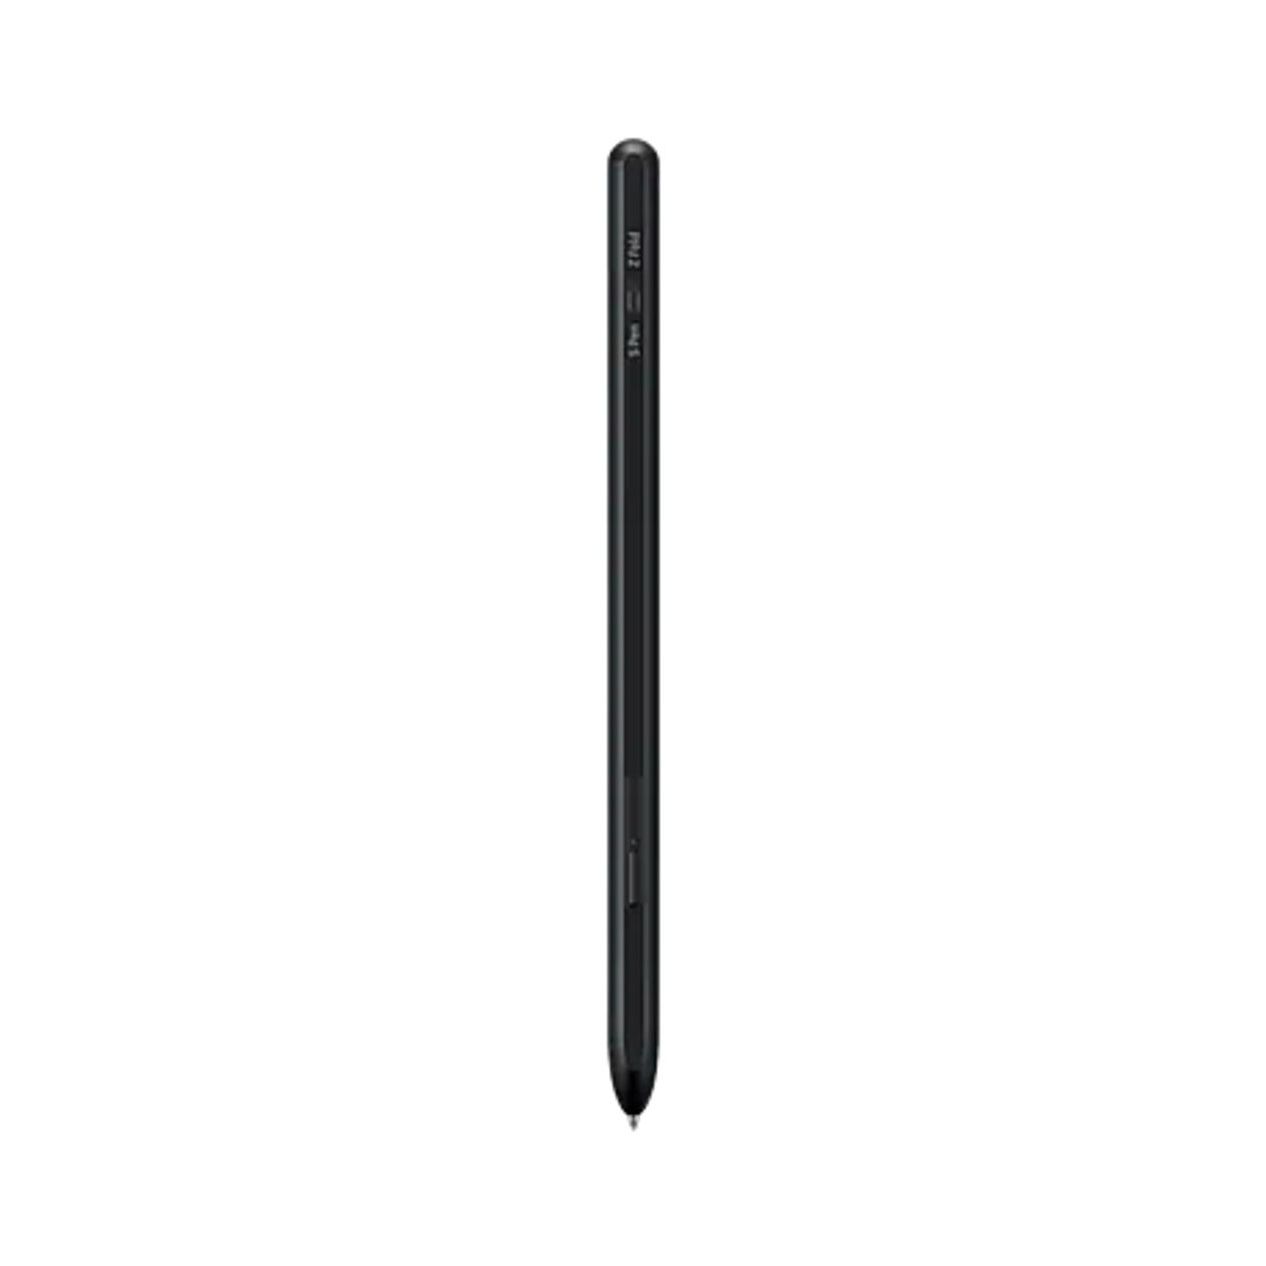 Samsung S Pen - Cellular Accessories For Less